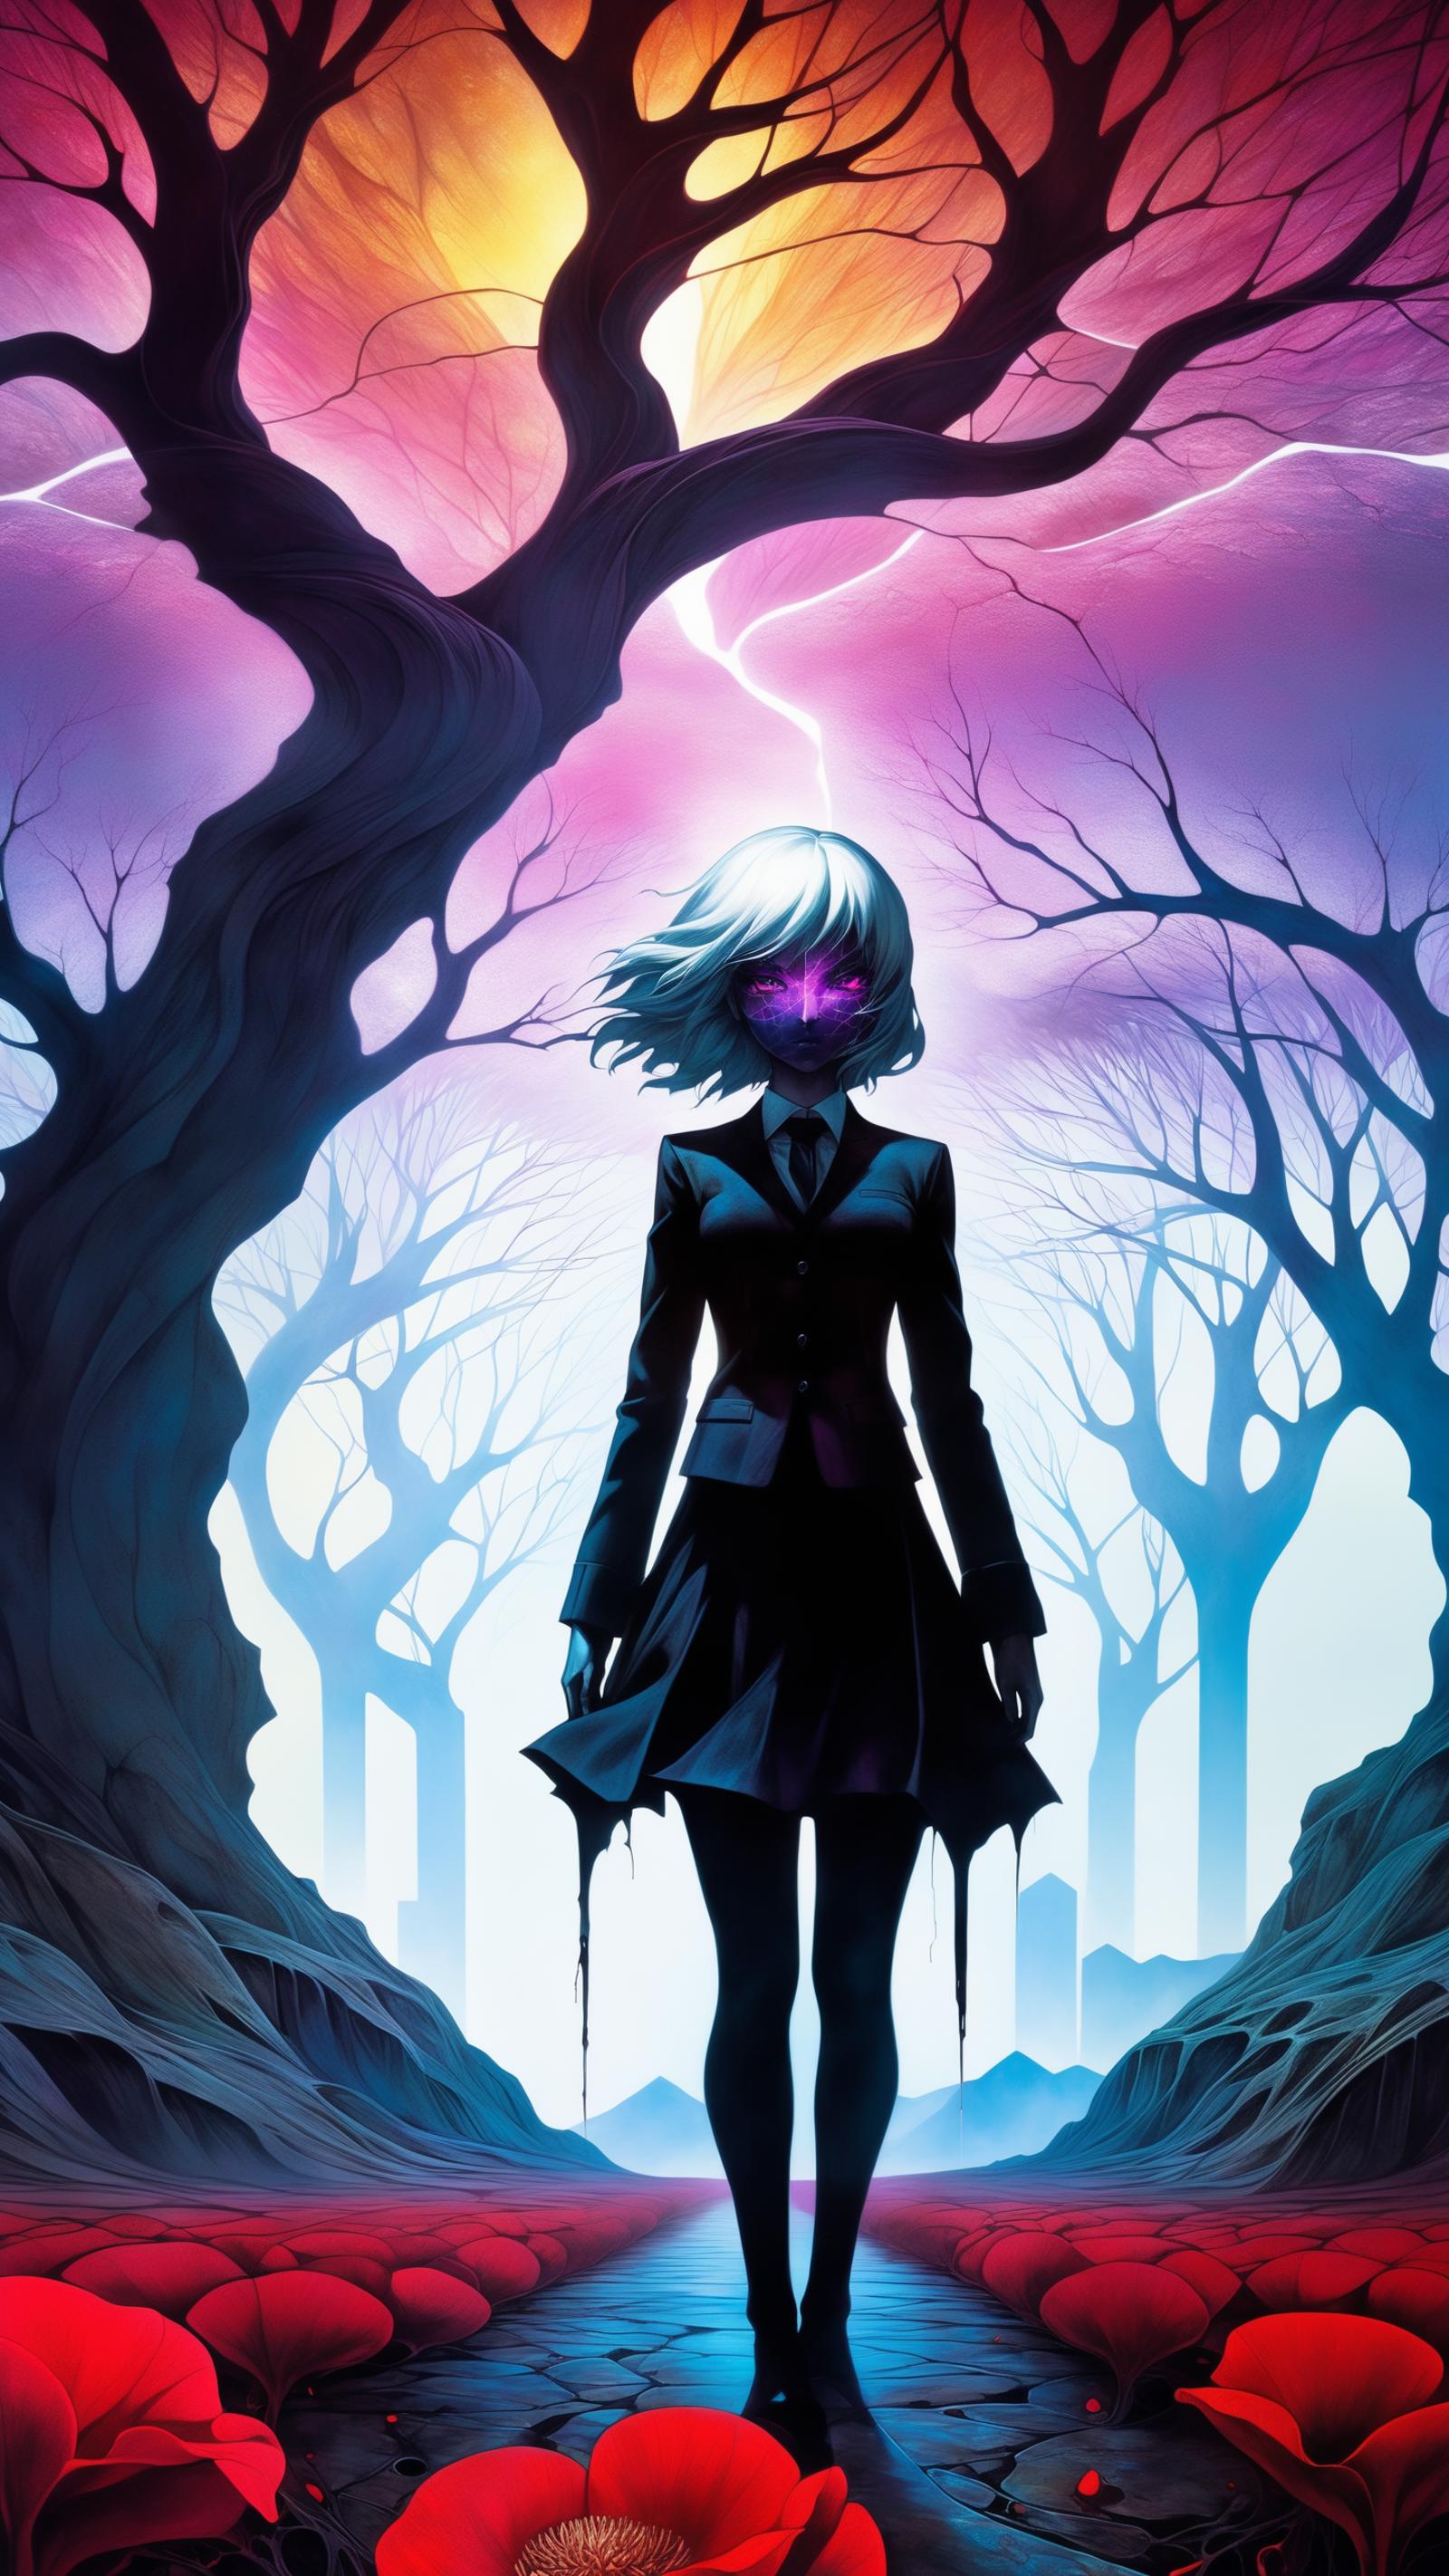 A woman in a suit stands in a dark forest with purple eyes.